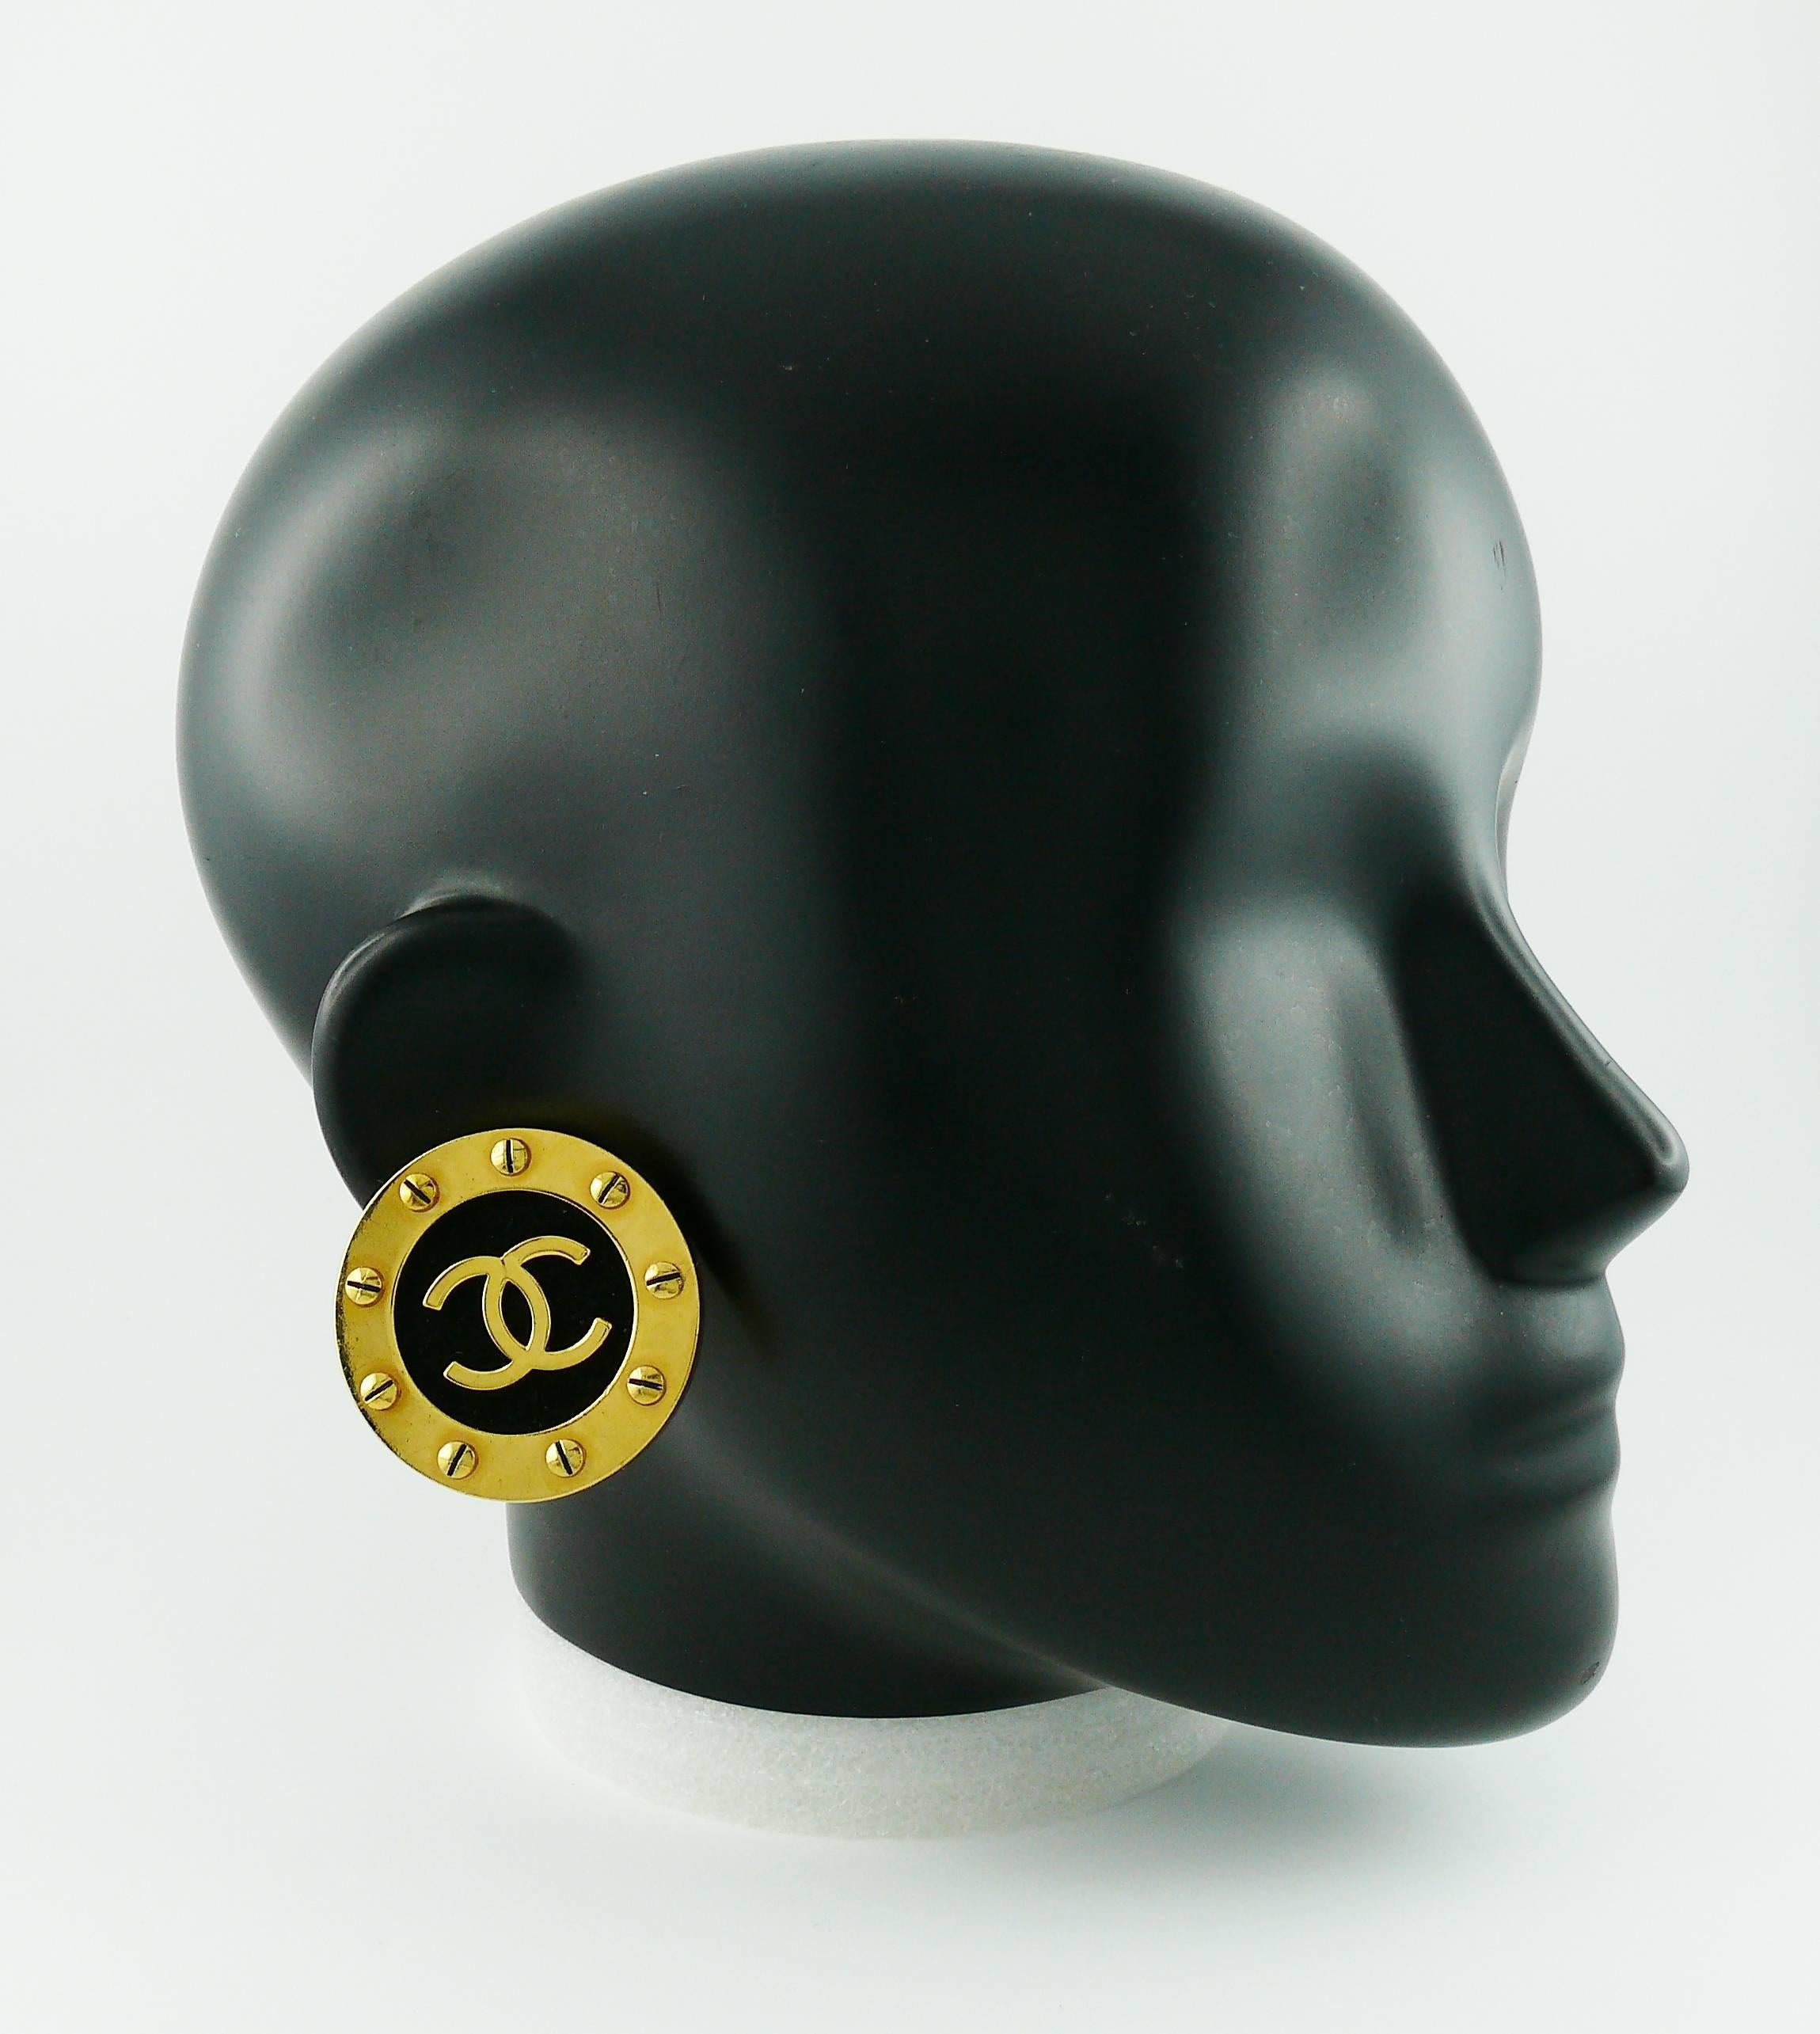 CHANEL vintage 1990s massive gold toned screw stud clip-on earrings.

These earrings feature screw stud trim with a CC logo monogram in the center on a black suede background.

Embossed CHANEL 2 9 Made in France.

JEWELRY CONDITION CHART
- New or